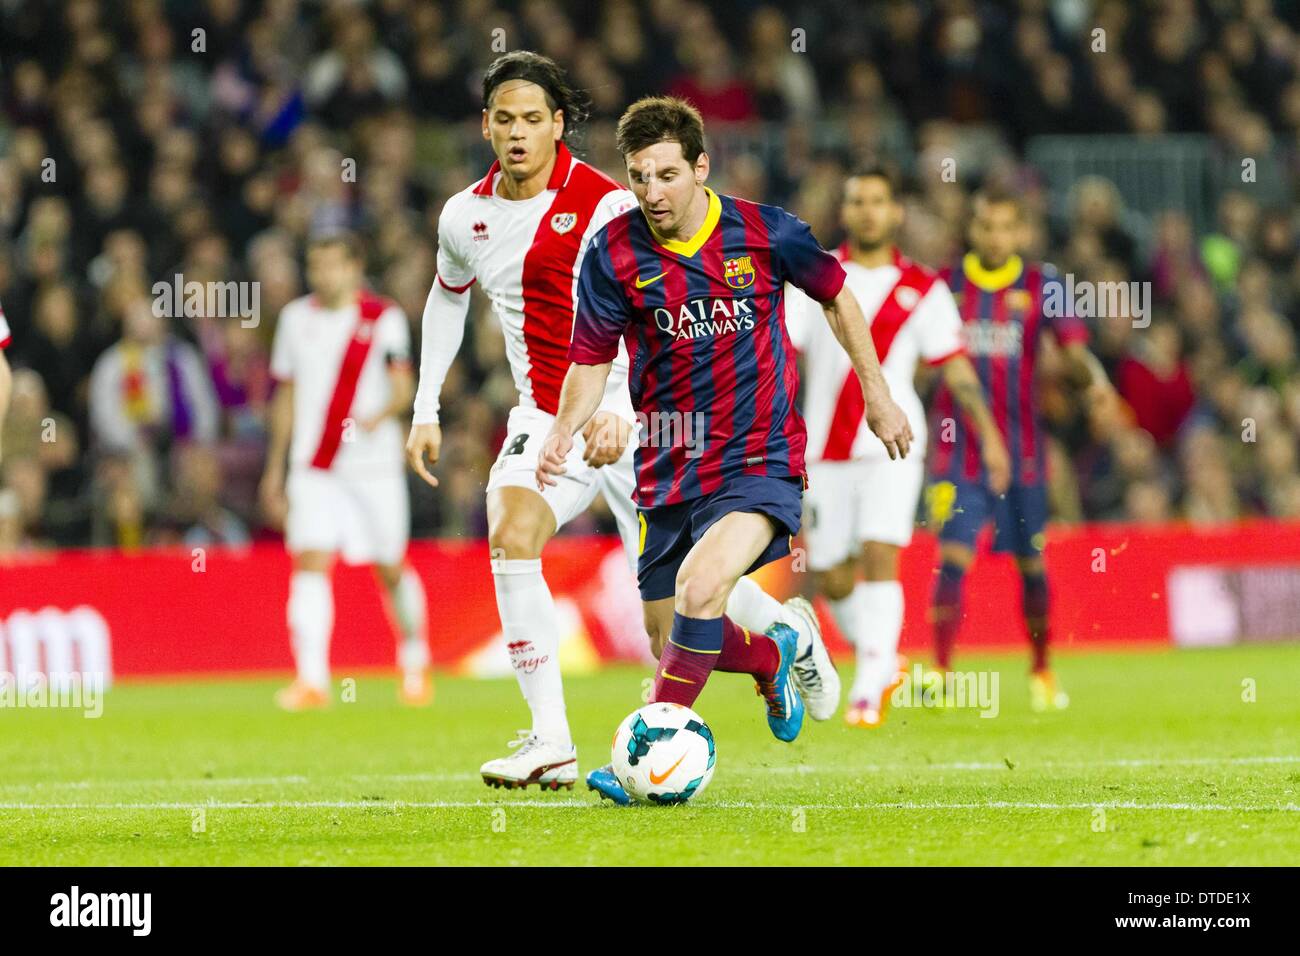 Barcellona, Spain. 15th Feb, 2014. BARCELONA - 15 of february - ESPANA: Leo Messi during the match of the rounnd 24 of Liga BBVA between FC Barcelona and Rayo Vallecano, played at Camp Nou stadium, saturday, 15 of february of 2014. Credit:  Mikel Trigueros/NurPhoto/ZUMAPRESS.com/Alamy Live News Stock Photo